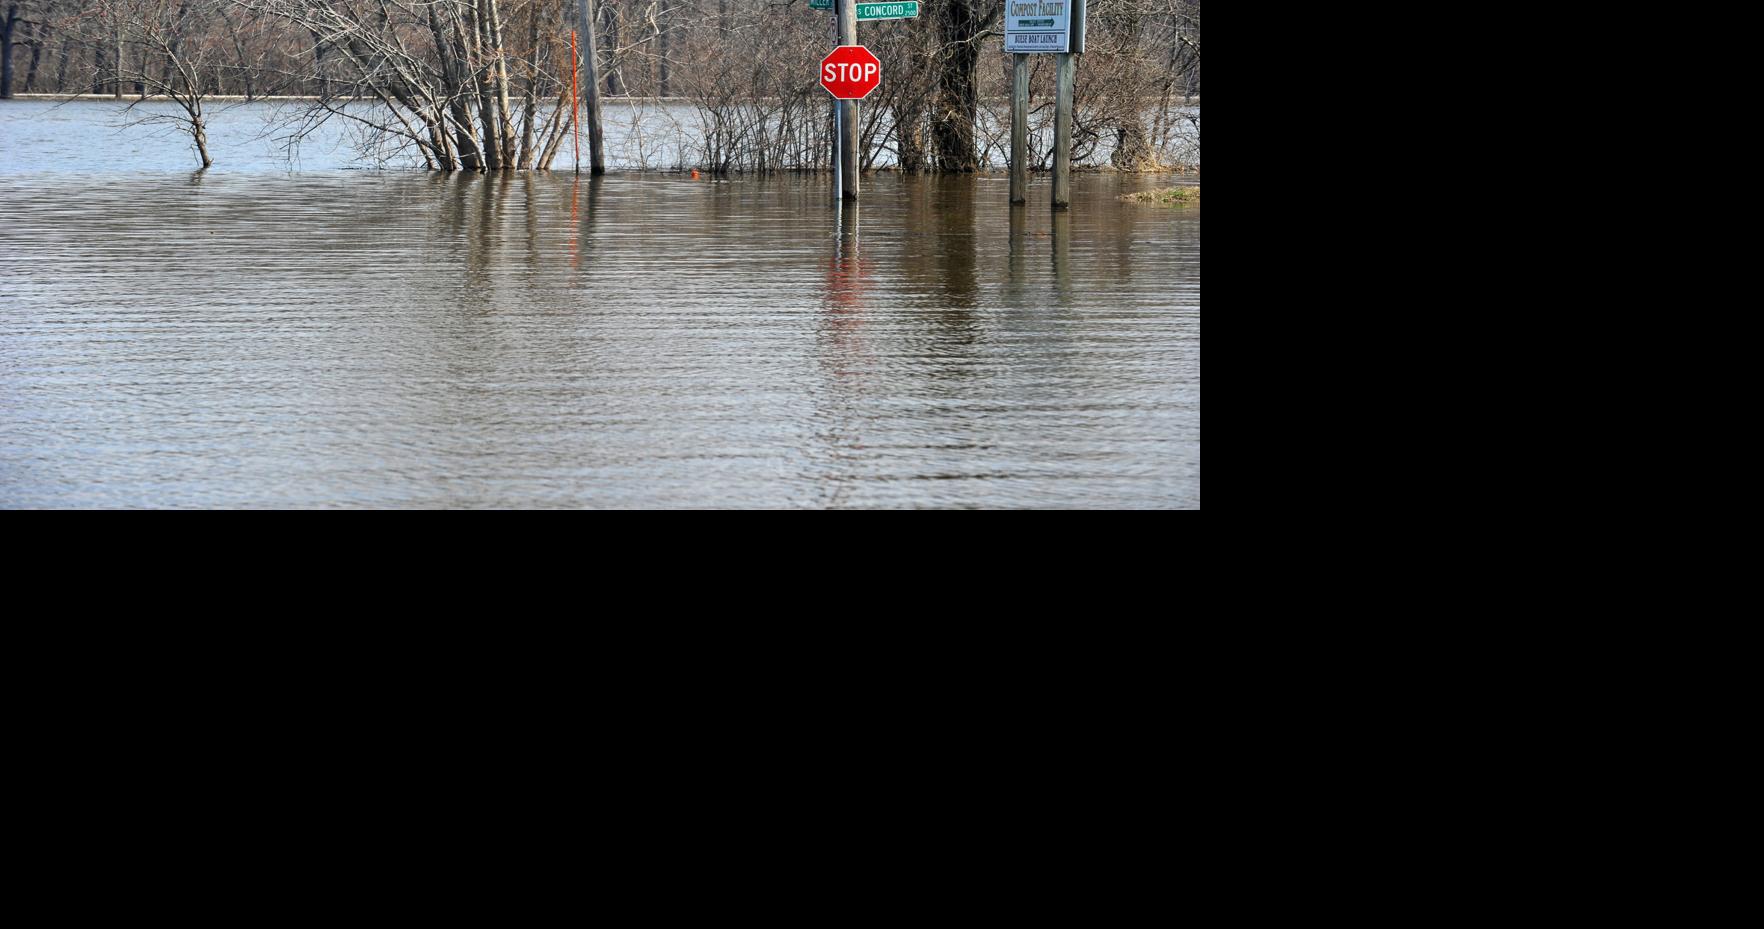 Mississippi River rises above 13 feet in Davenport; S. Concord Street closed